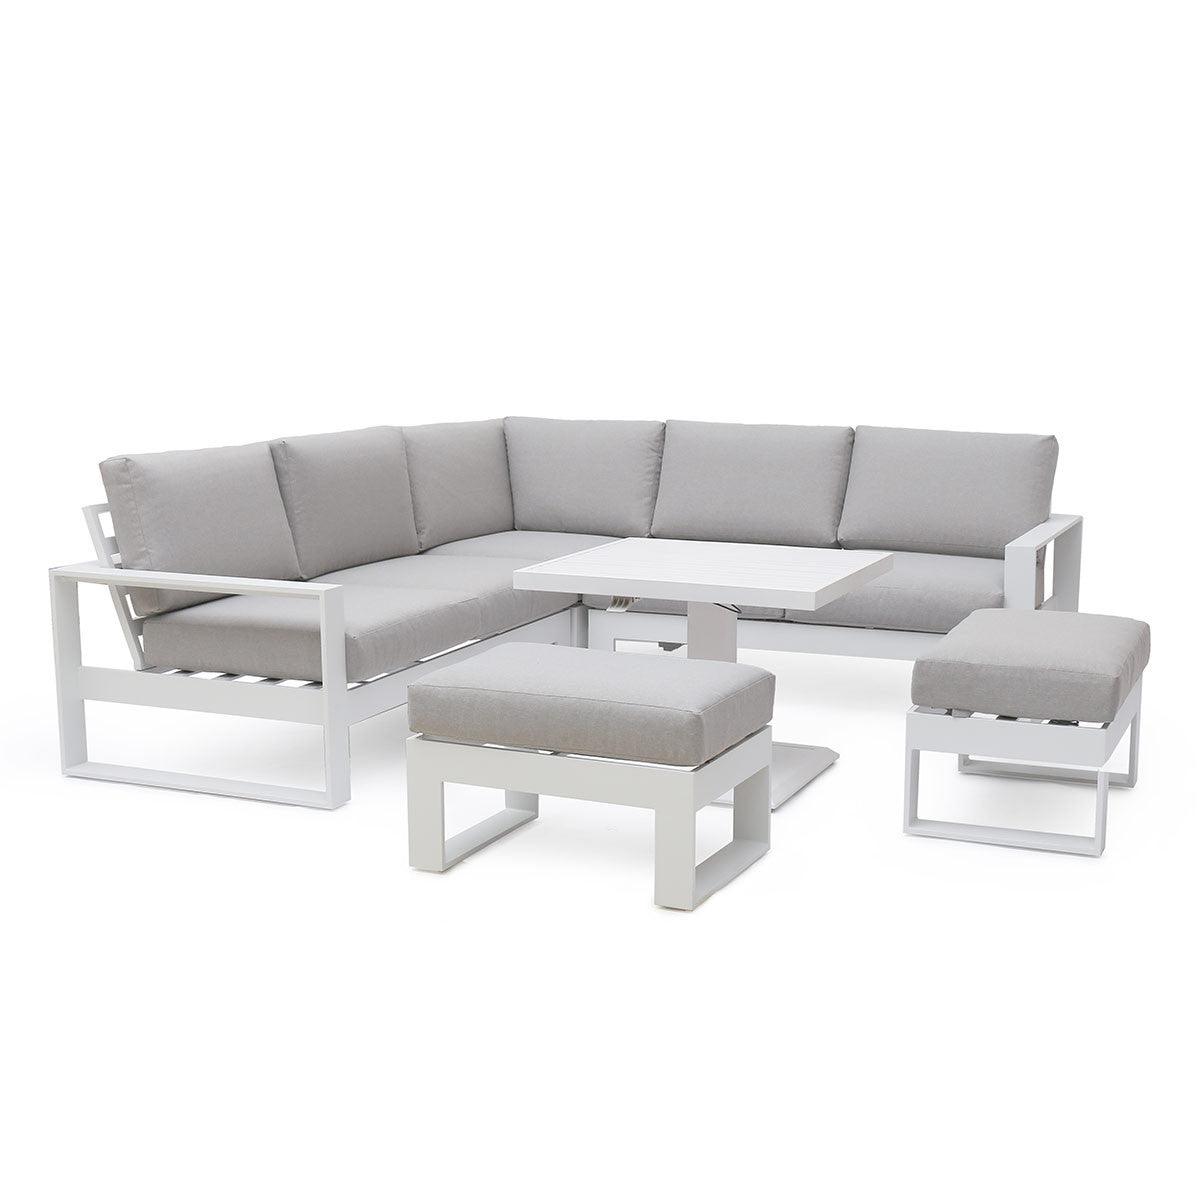 Amalfi Small Corner Dining with Square Rising Table and Footstools - Vookoo Lifestyle